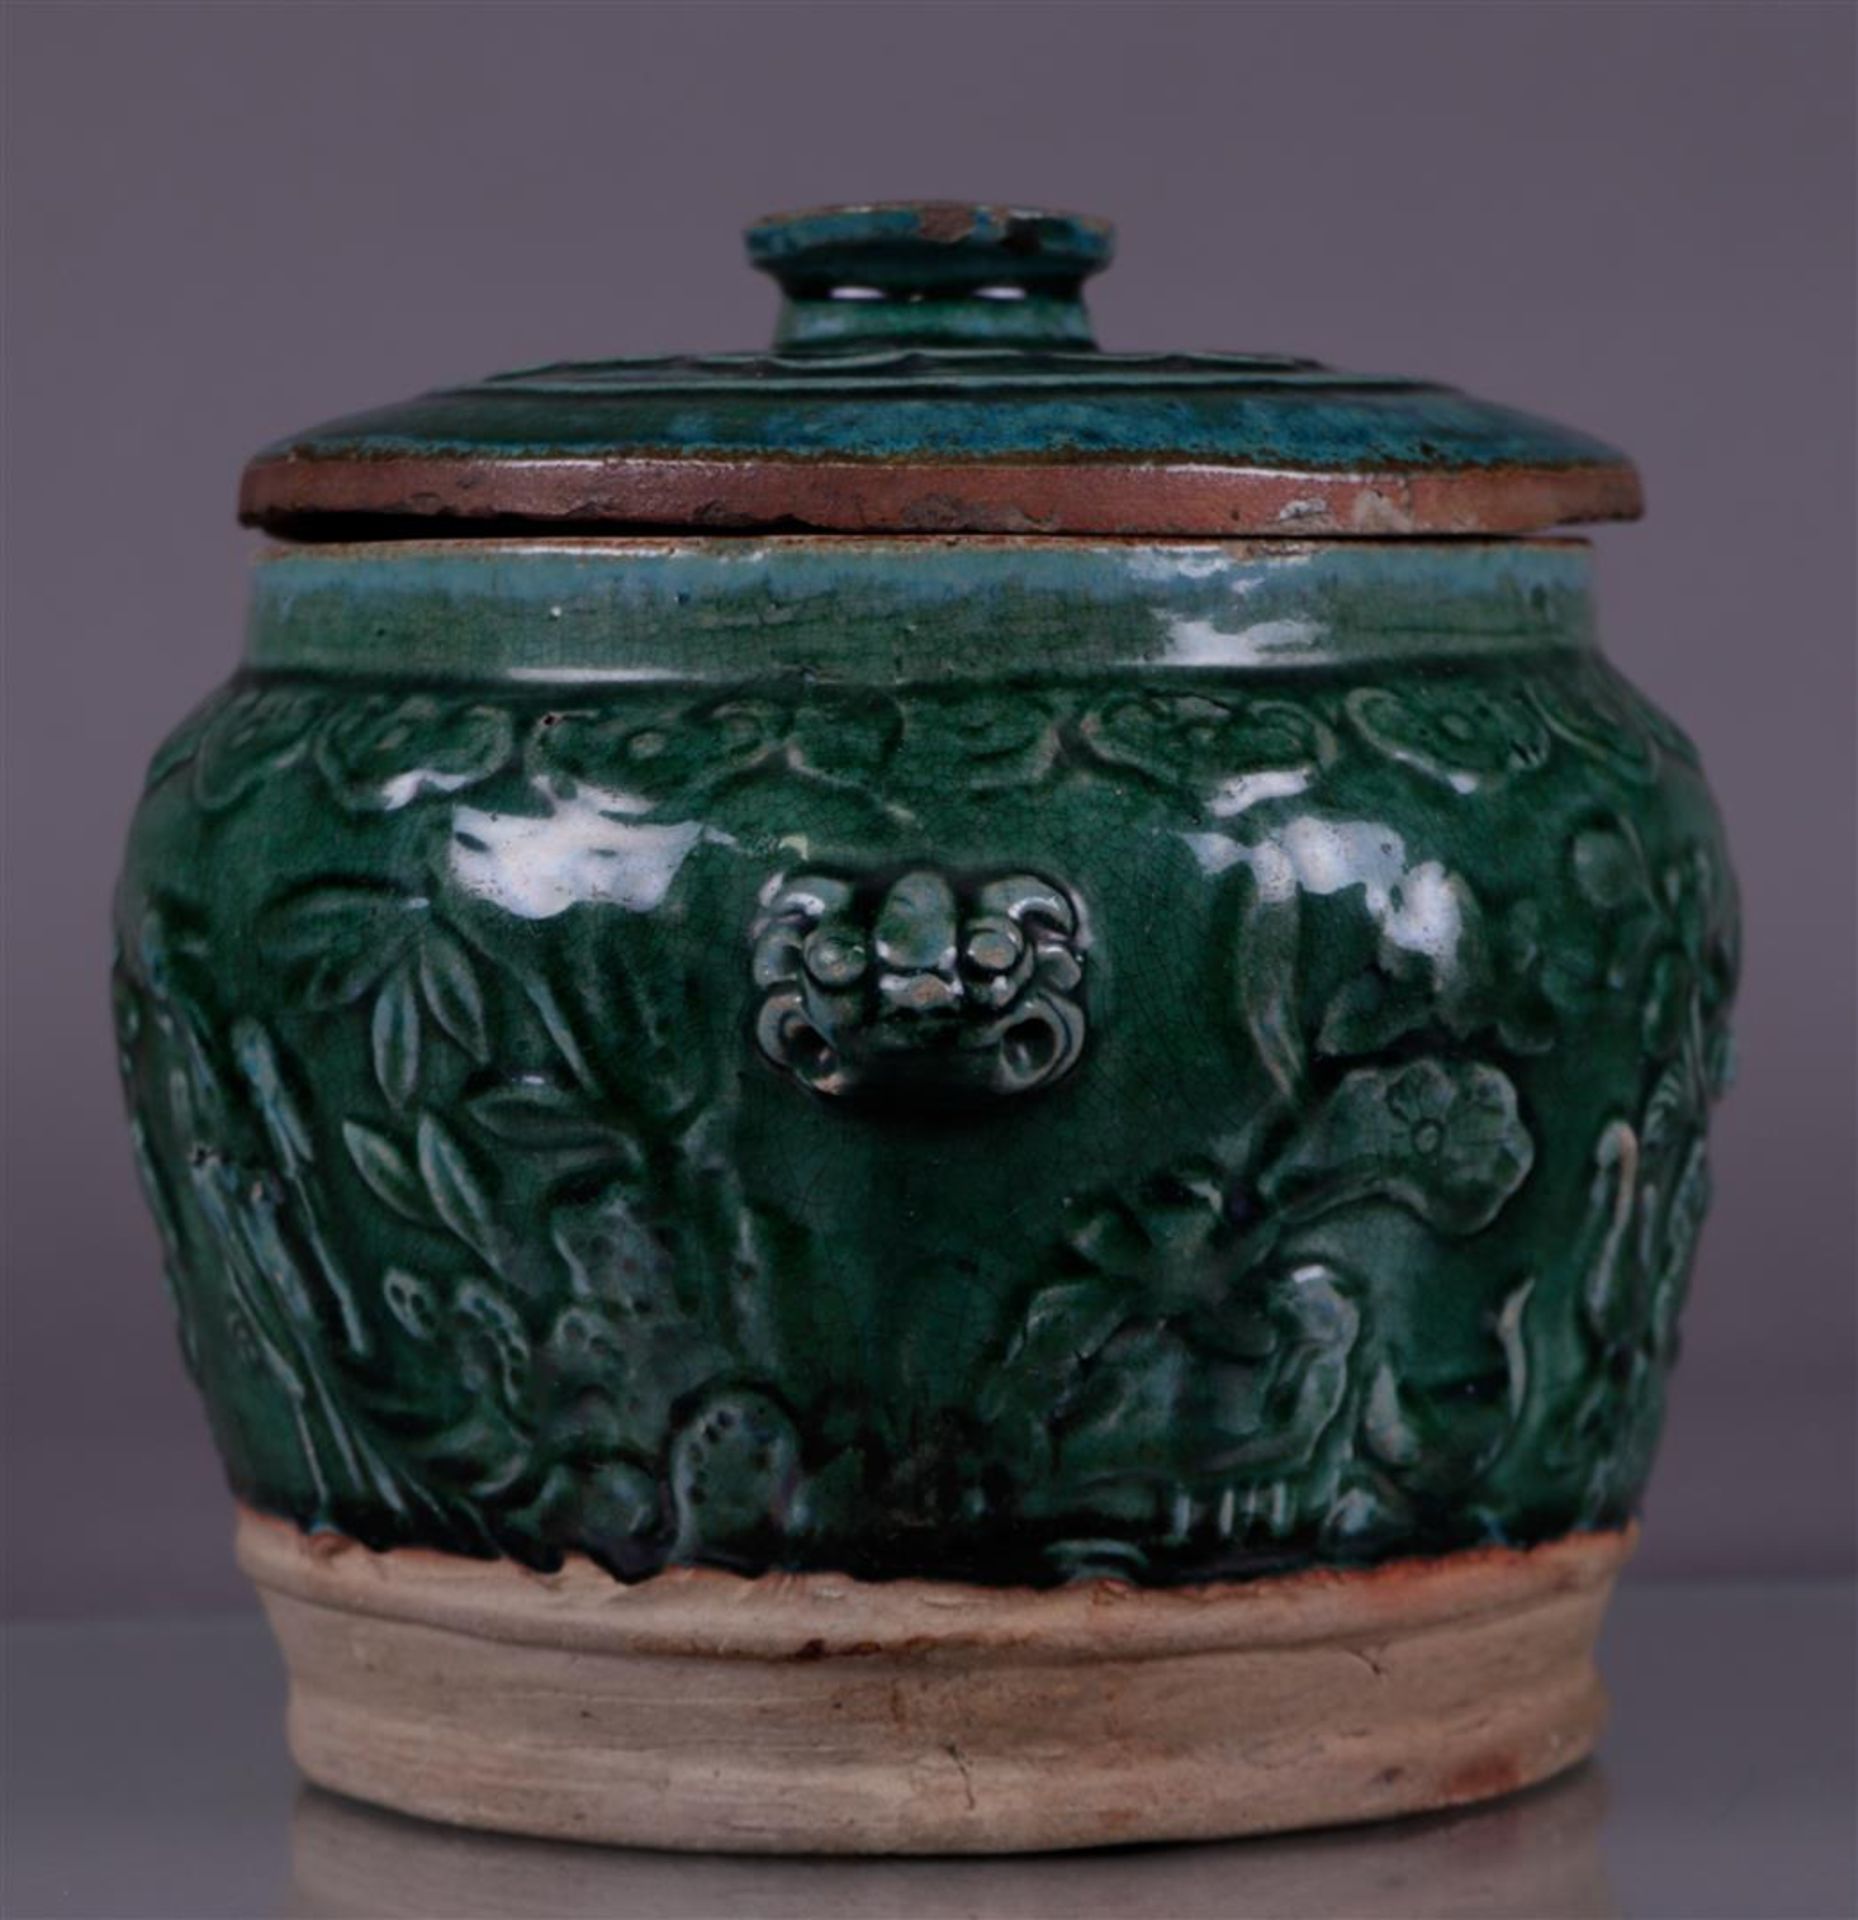 A green glazed lidded container. China, Ming?
Diam. 24 cm. - Image 2 of 4